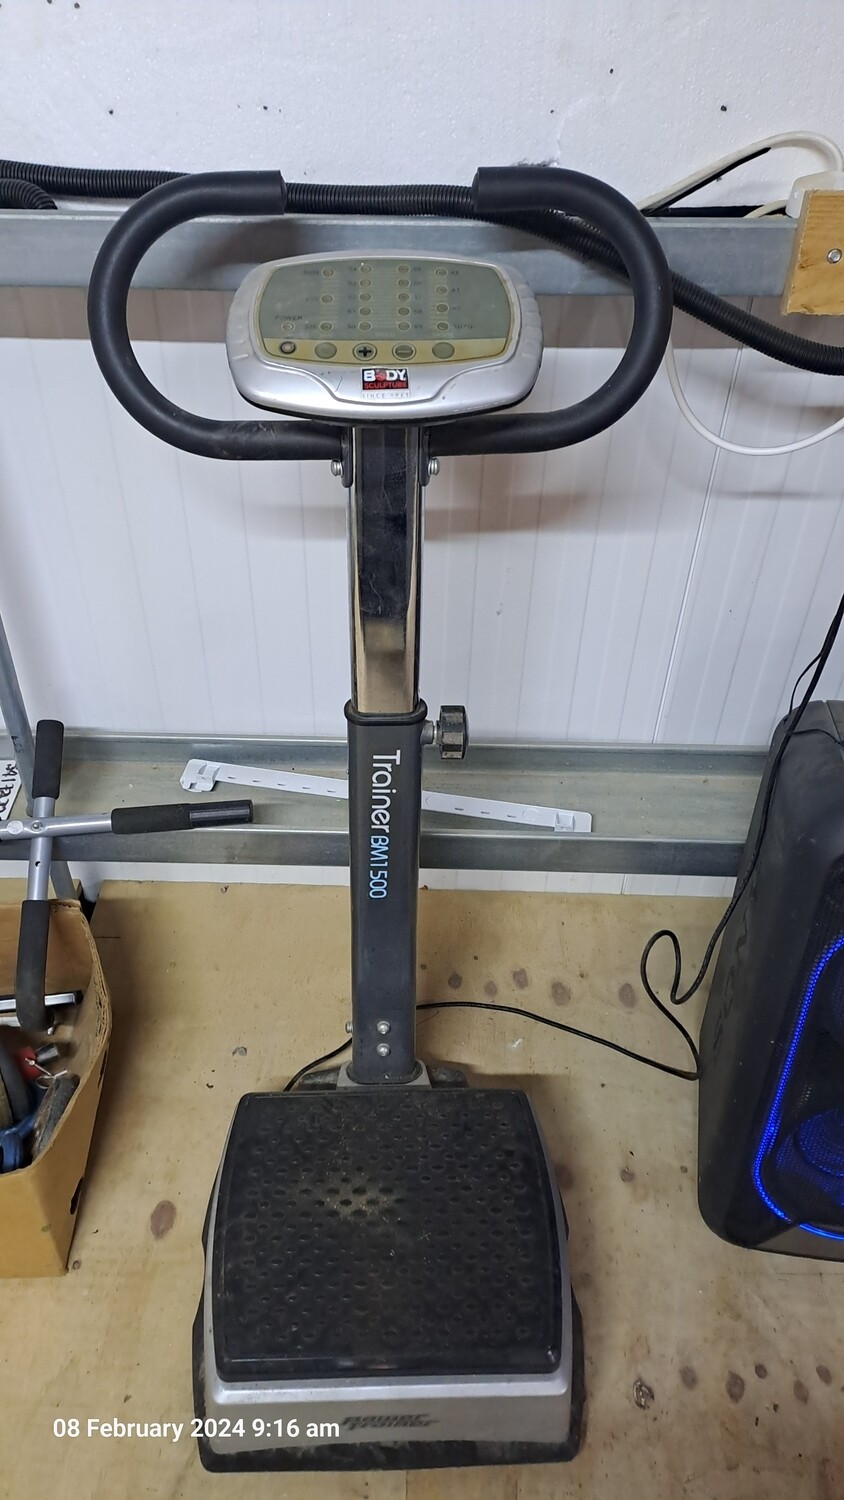 Body Sculpture BM1500 Power Trainer Vibration Plate - Preowned